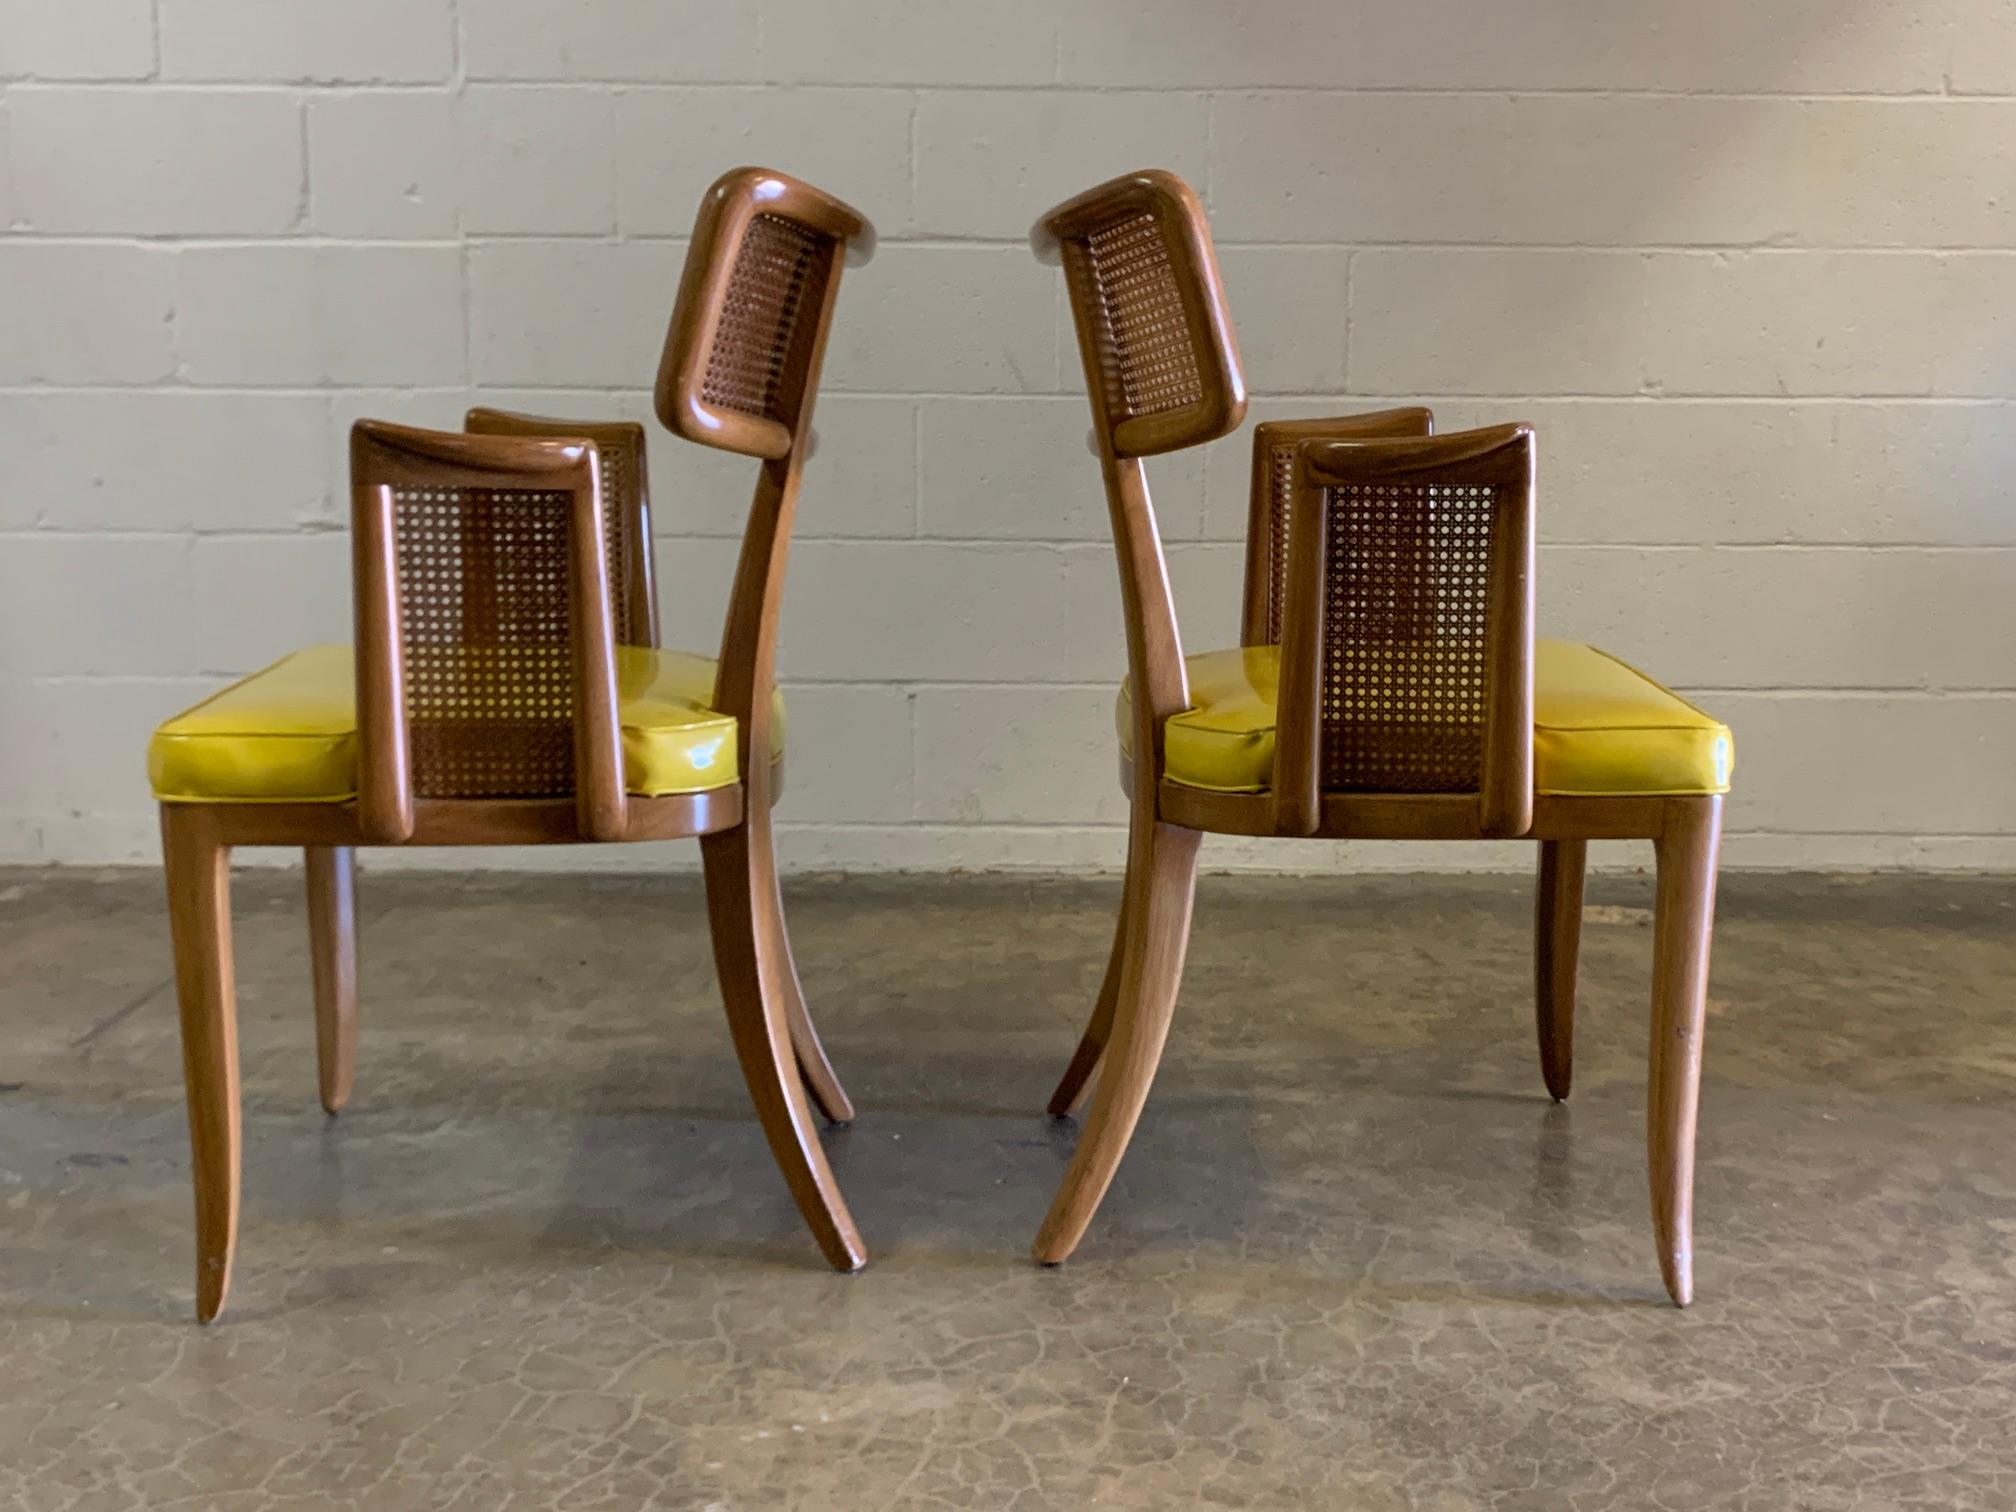 Pair of Armchairs by Edward Wormley for Dunbar 1